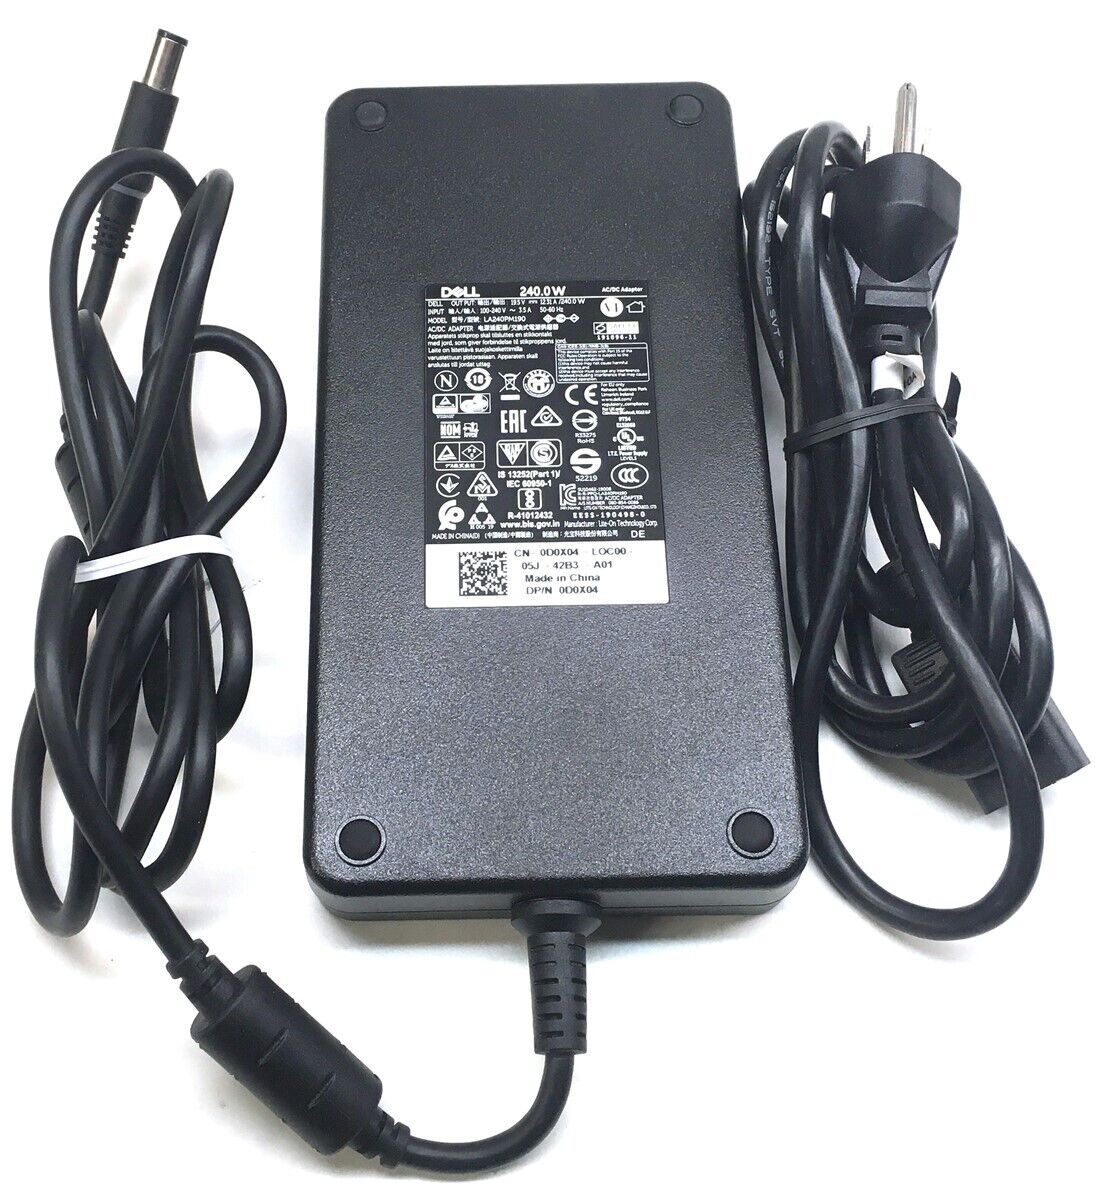 Genuine Dell Laptop Charger AC Adapter Power Supply LA240PM190 0D0X04 19.5V 240W Brand Dell Type Power Adapter Compatib - Click Image to Close